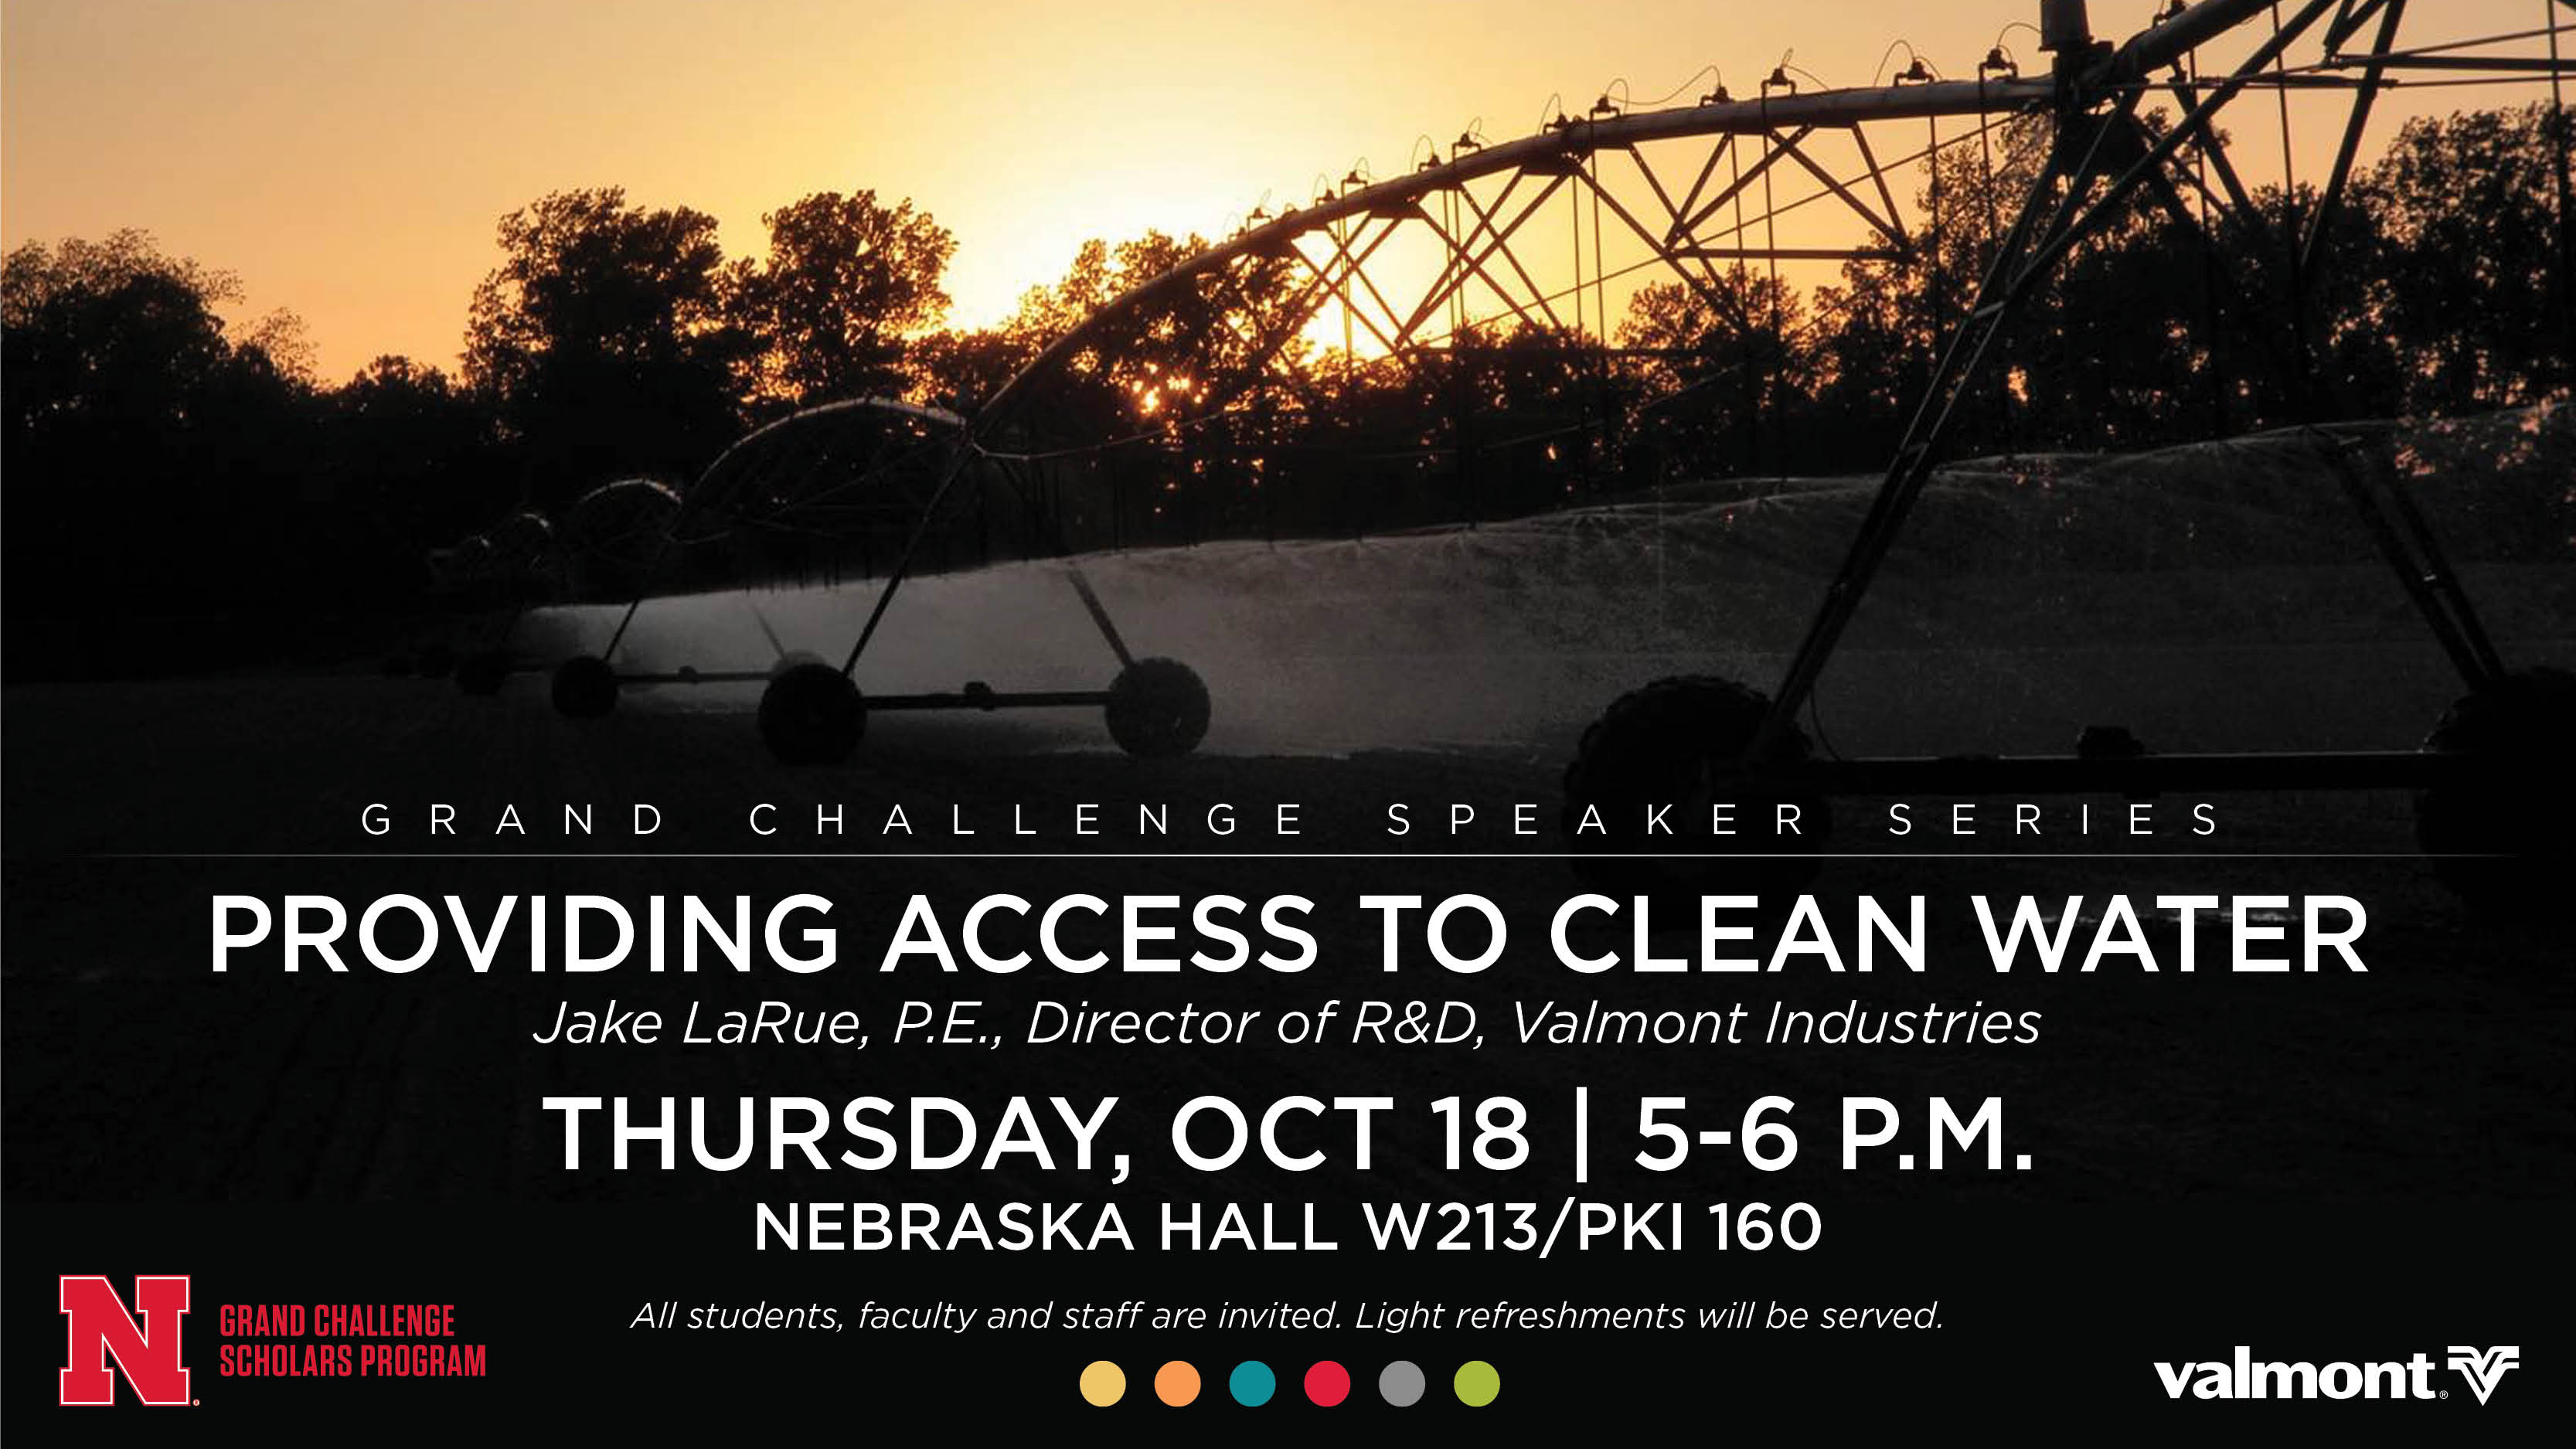 Jake LaRue will discuss “Providing Access to Clean Water” on Oct. 28 as part of the Grand Challenge Speaker Series.